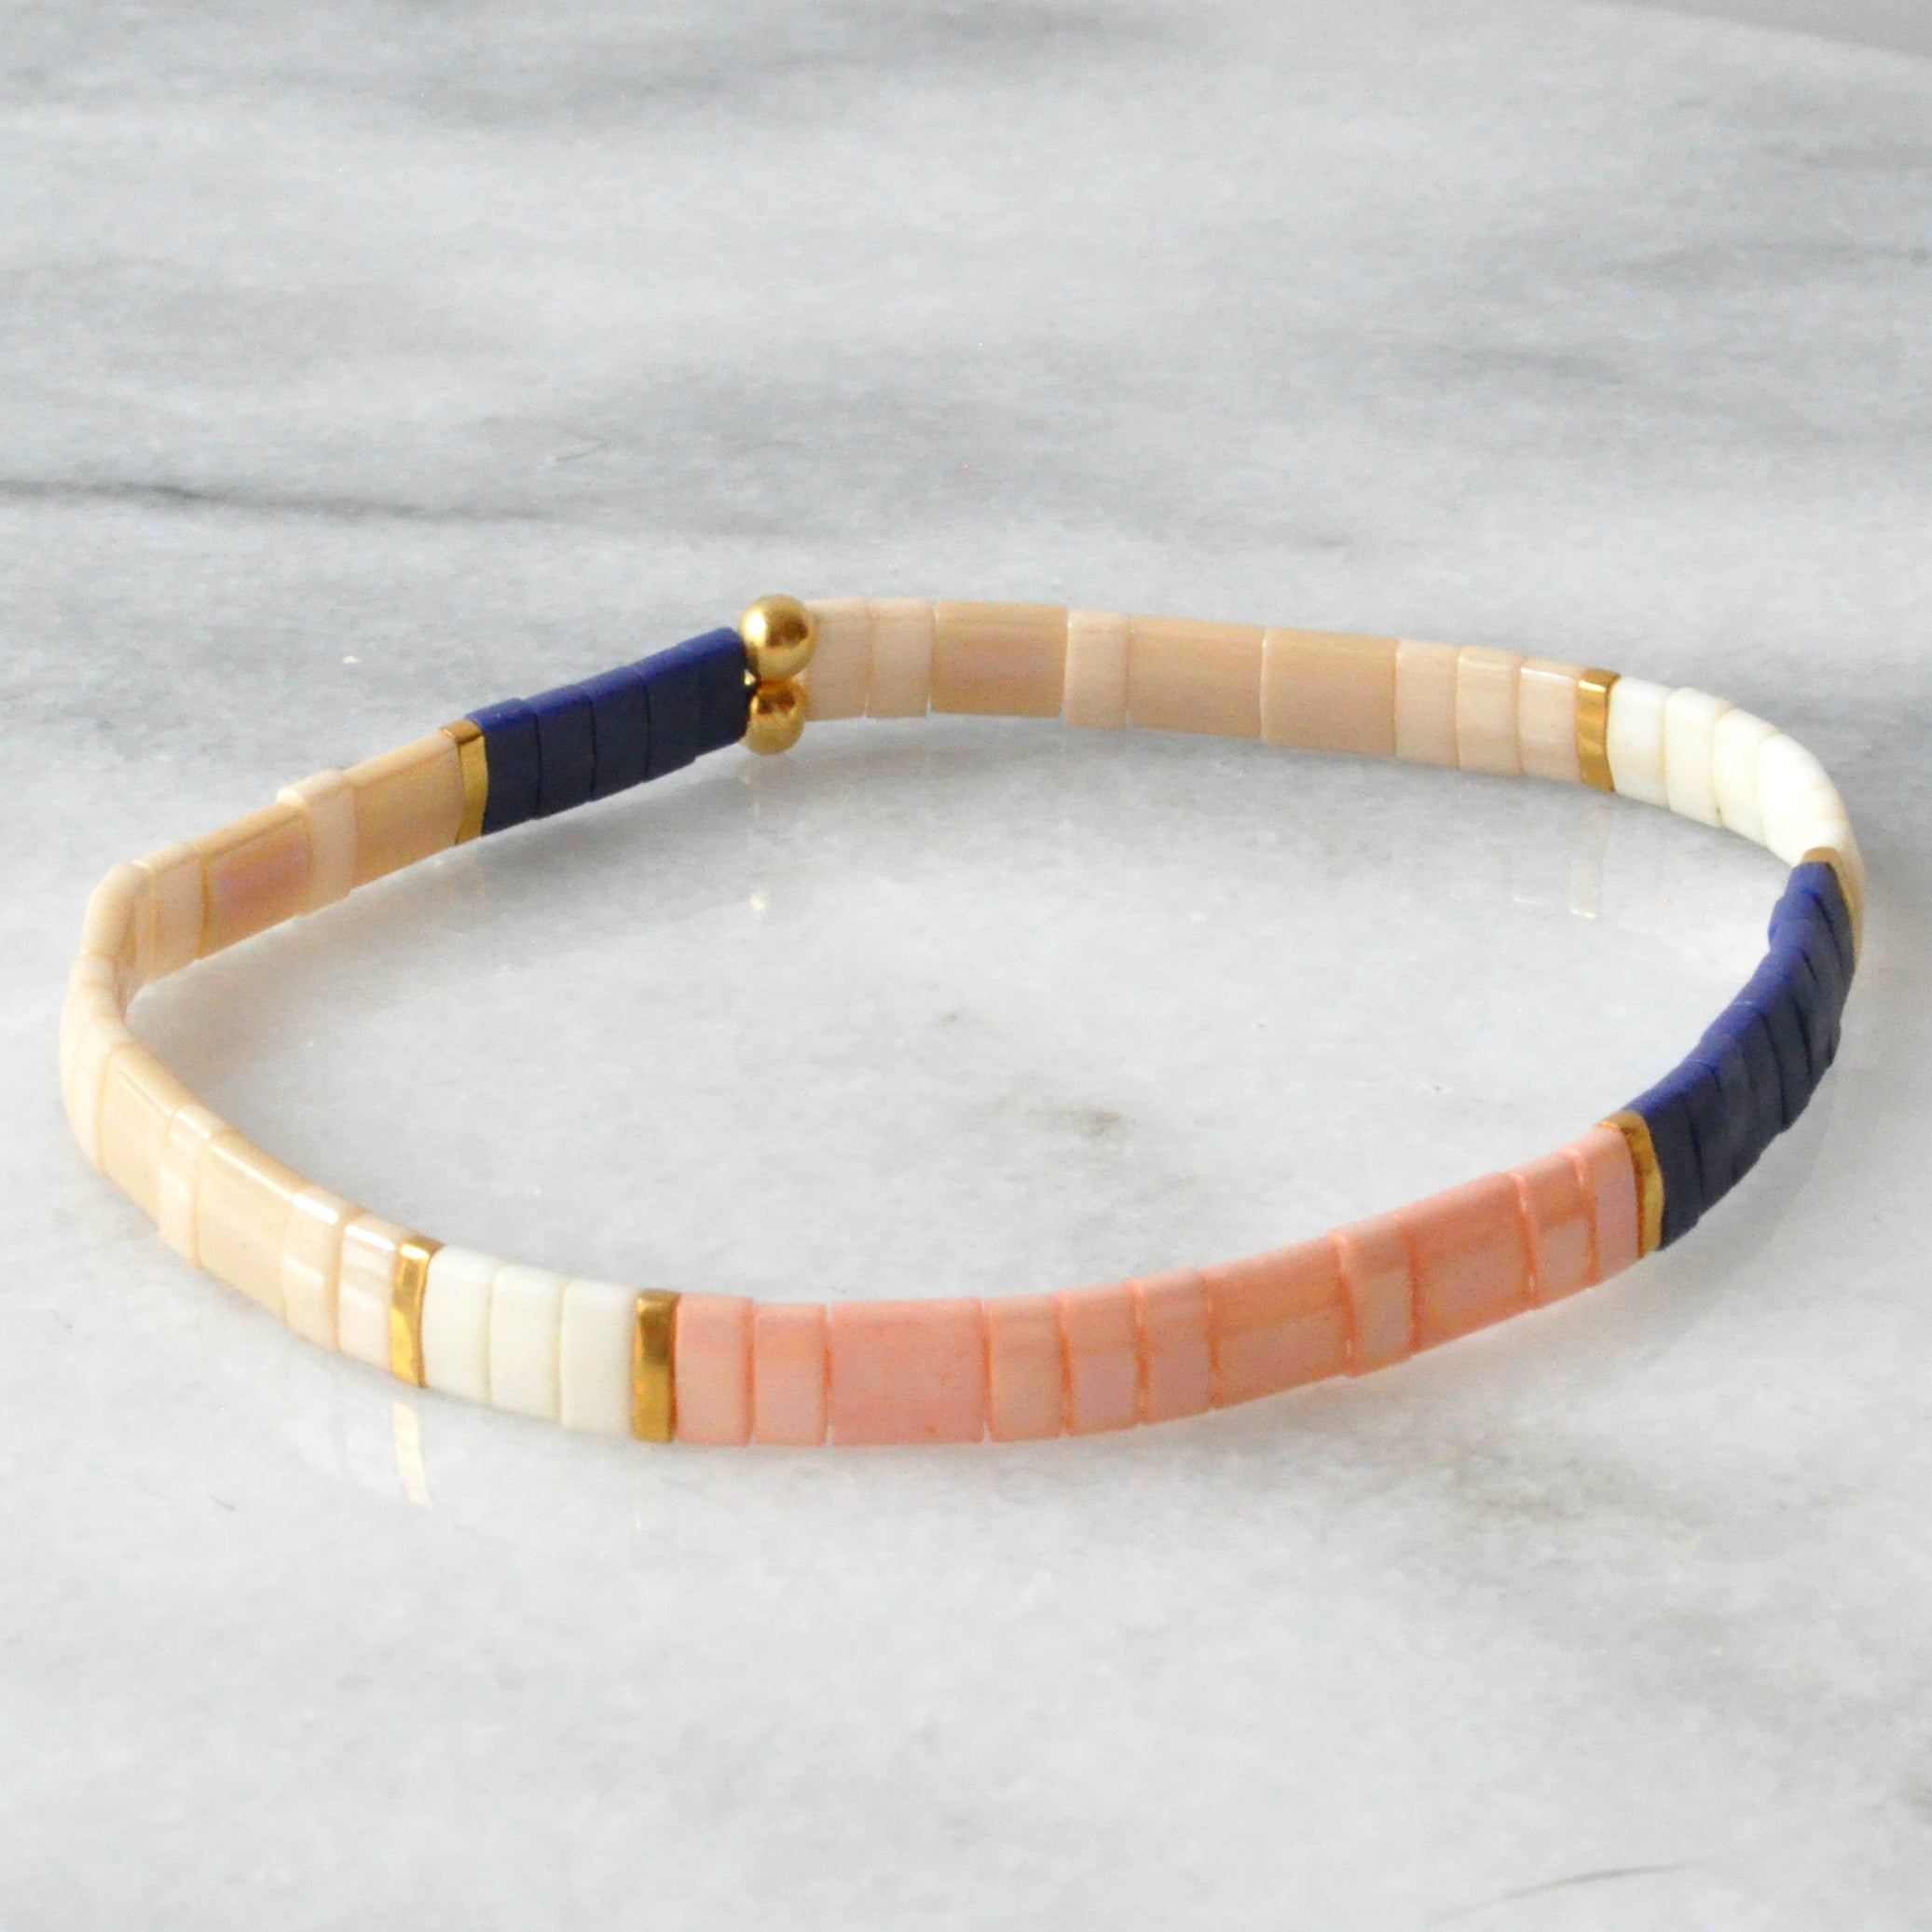 Libby & Smee stretch tile bracelet in Classic Colorblock